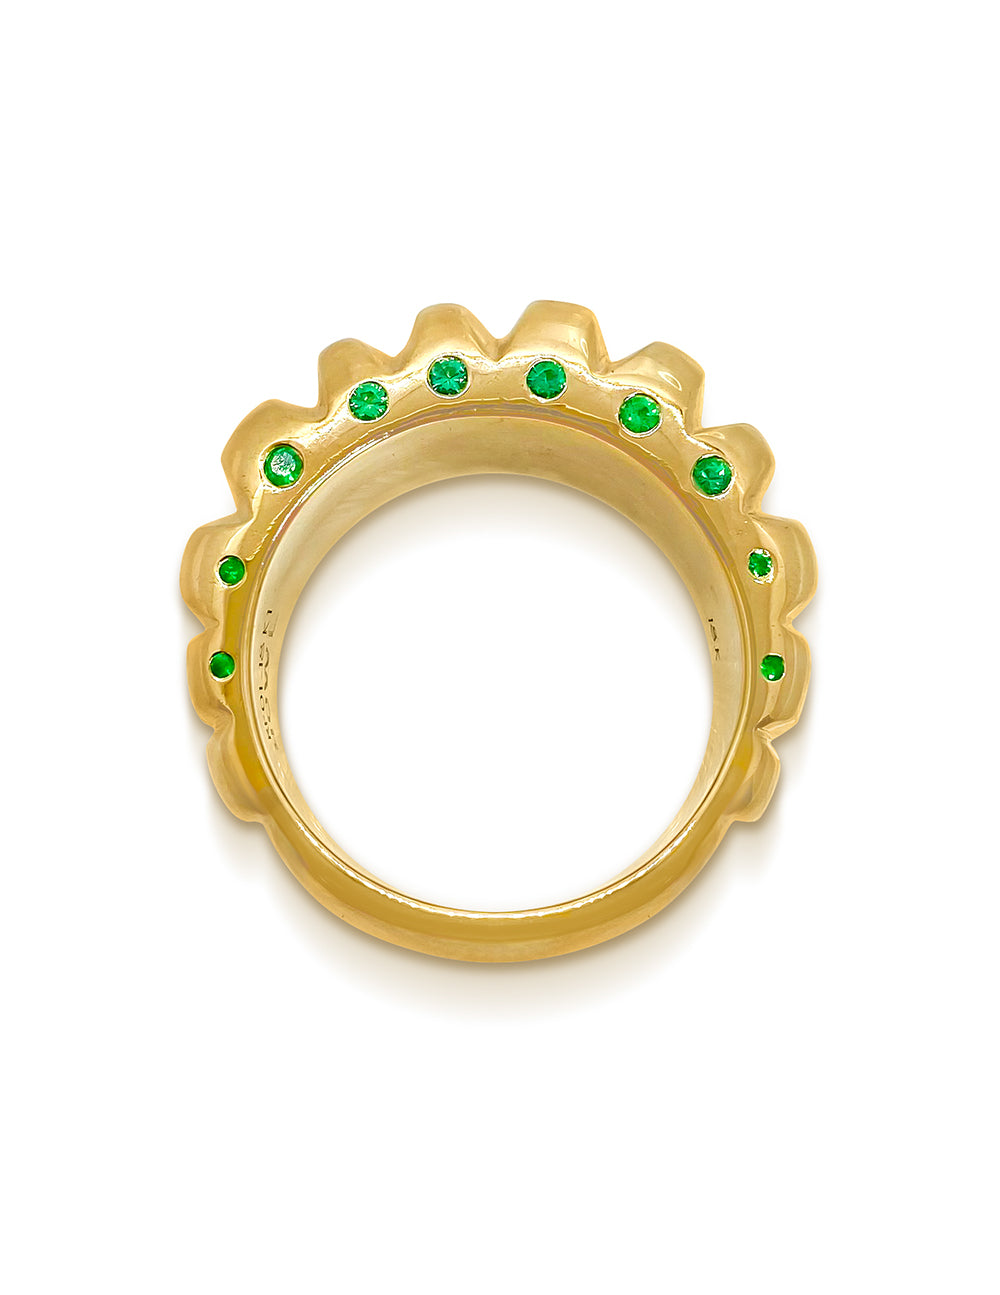 THE BOMB SHELL EMERALD RING